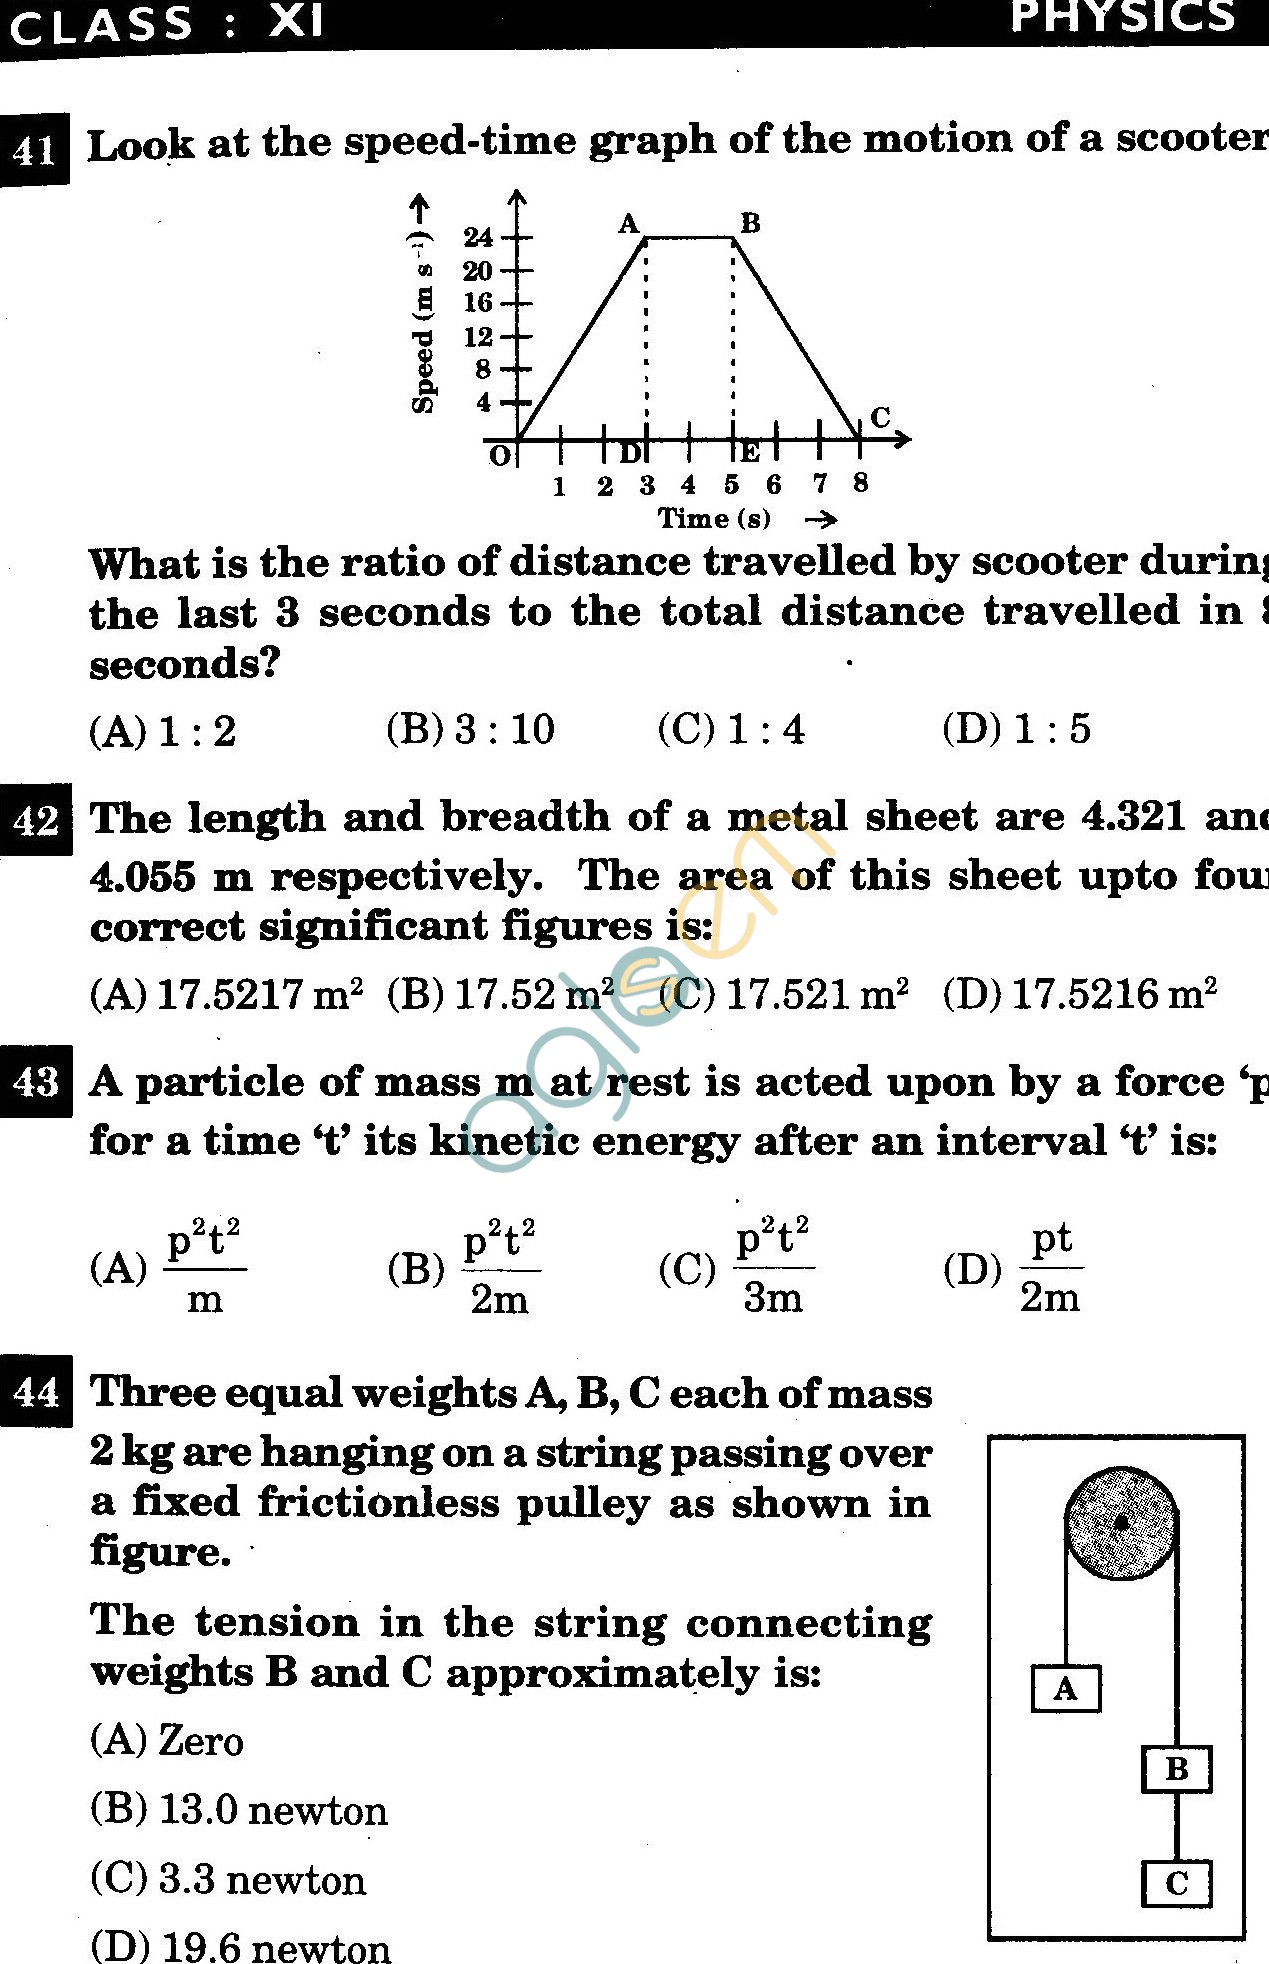 NSTSE 2011 Class XI PCB Question Paper with Answers - Physics